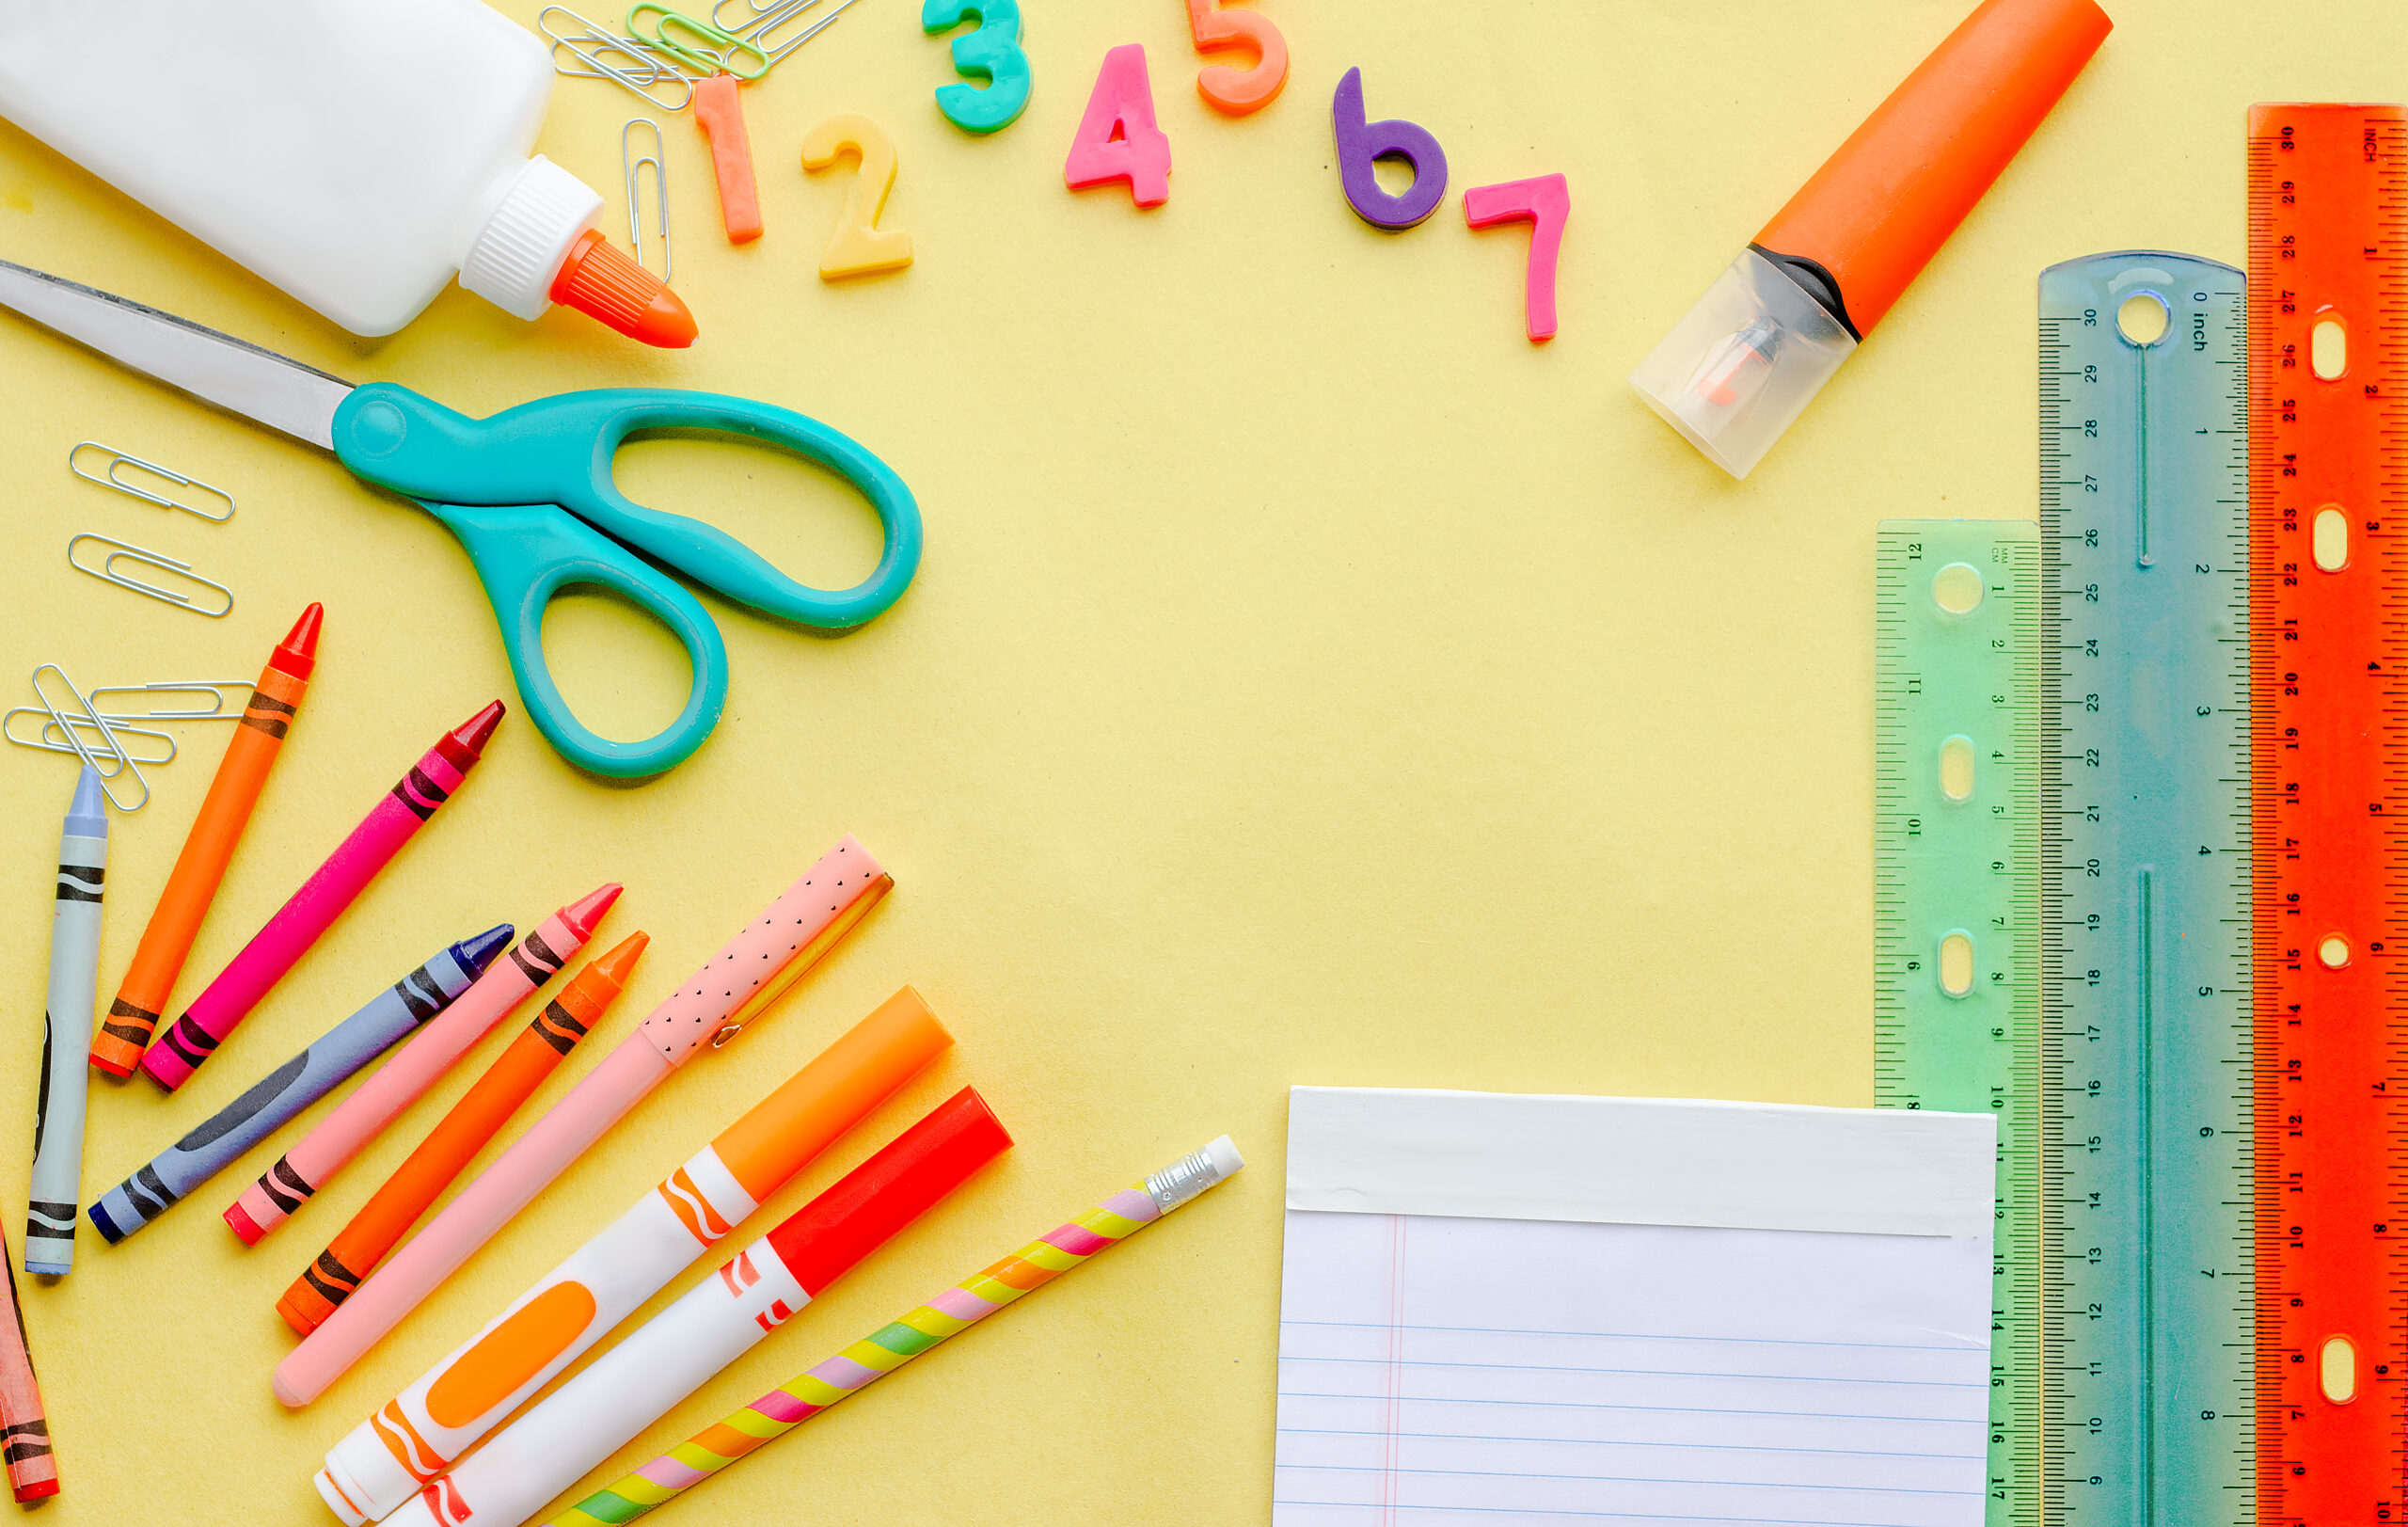 Preschool Homeschool Supplies: What You Need and What You Don't